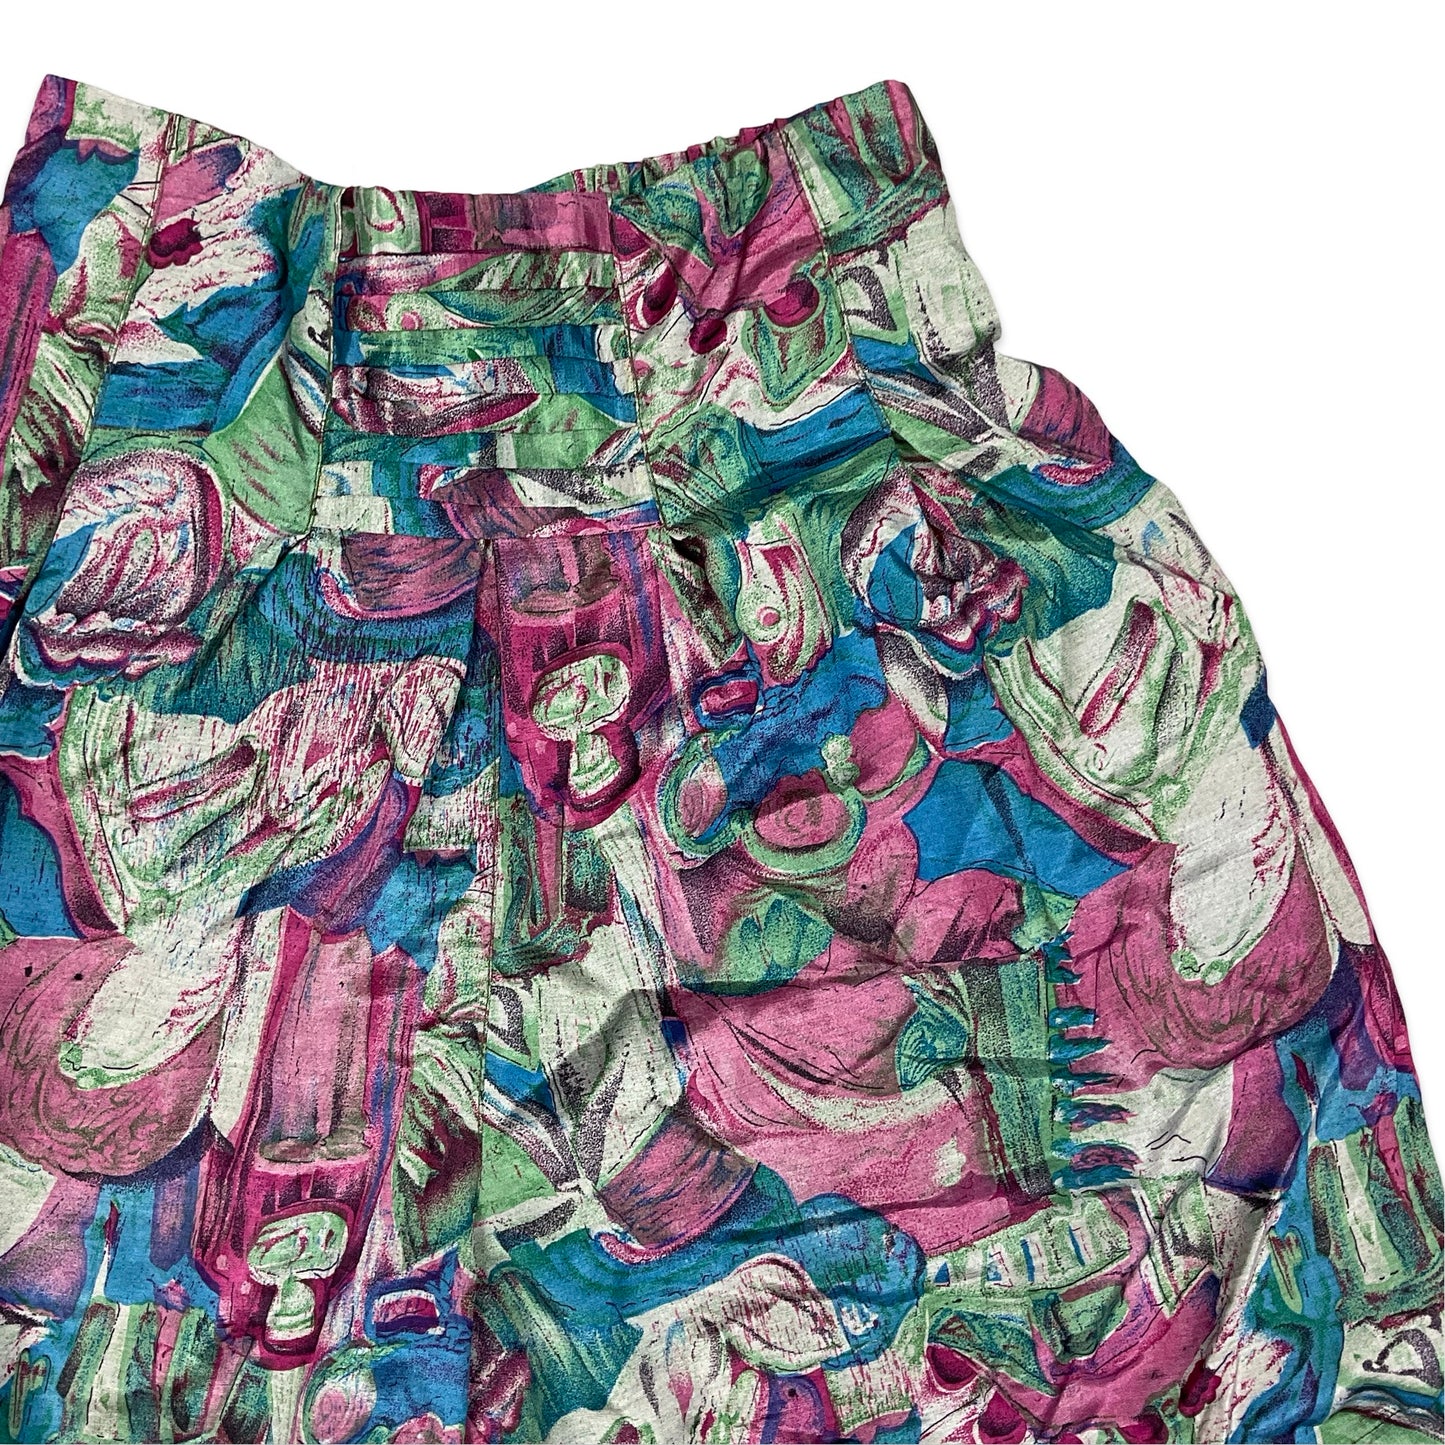 Vintage Abstract Print Pleated Shorts 10 12 14 16 18